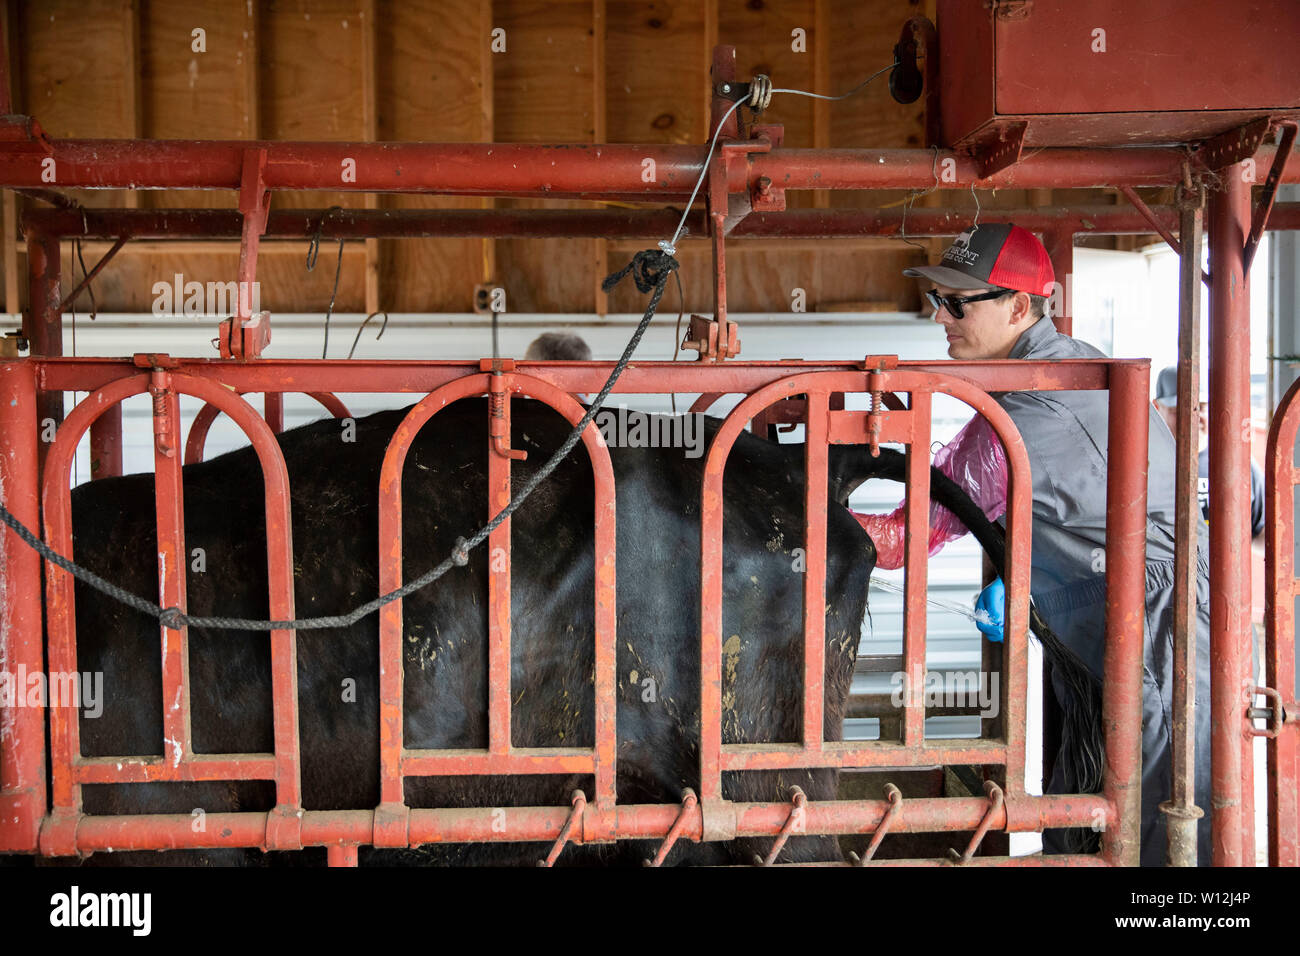 Atlantic, USA. 29th June, 2019. Cody Ham, Bill Pellett's long-time business partner Phil Ham's son, carries out artificial insemination procedures on Bill Pellett's farm in Atlantic, Iowa, the United States, on June 20, 2019. Bill Pellett, a fifth-generation farmer in Atlantic, a small city in the U.S. Midwestern state of Iowa, has found a cost-effective way to raise better calves each year without purchasing new bulls -- artificial insemination (AI). Credit: Wang Ying/Xinhua/Alamy Live News Stock Photo